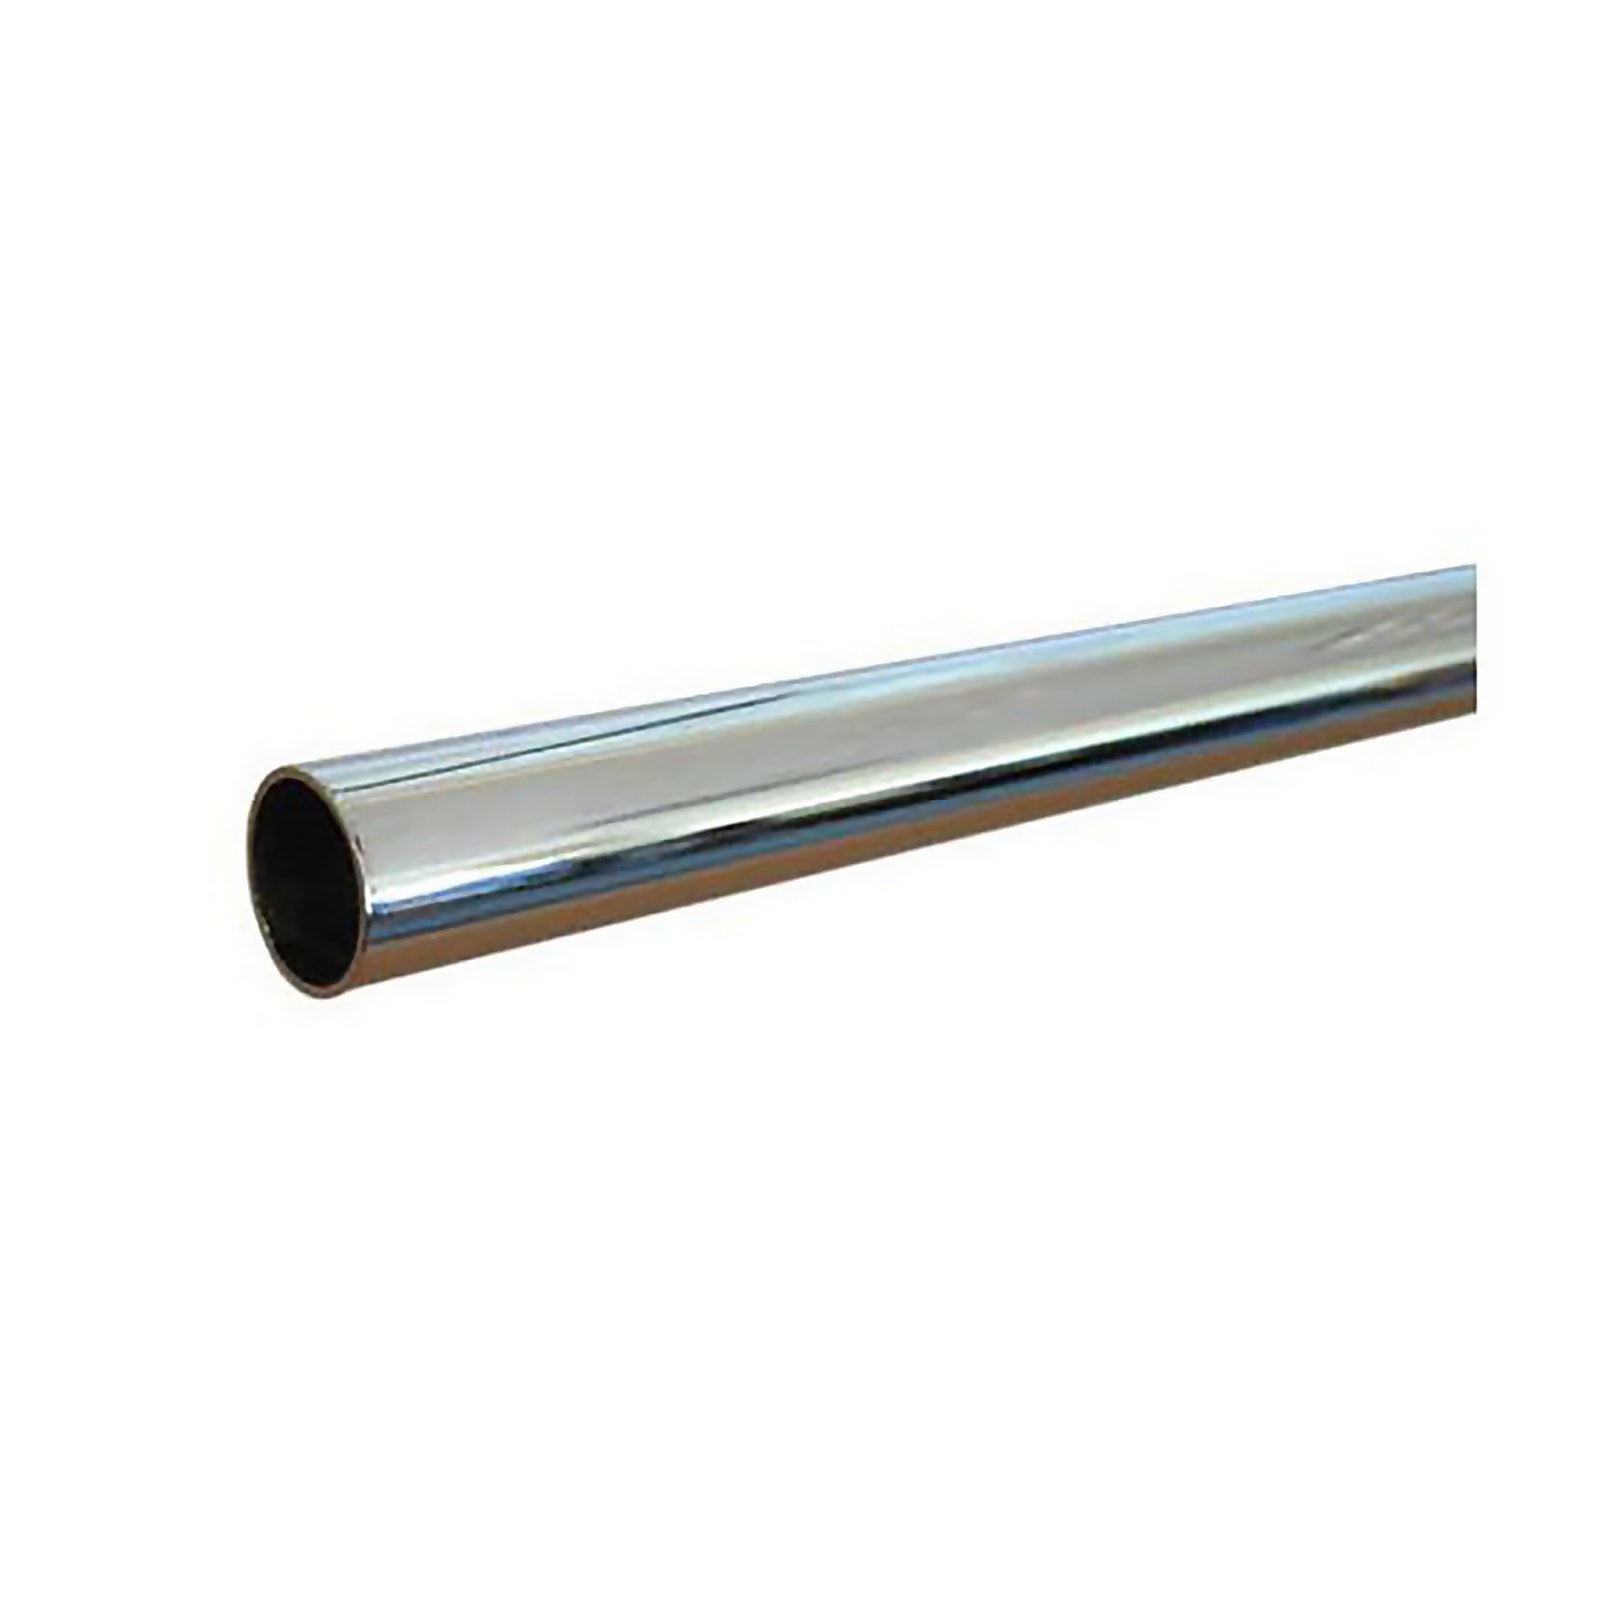 Photo of Copper Tube - Chrome Plated - 15mm X 2m